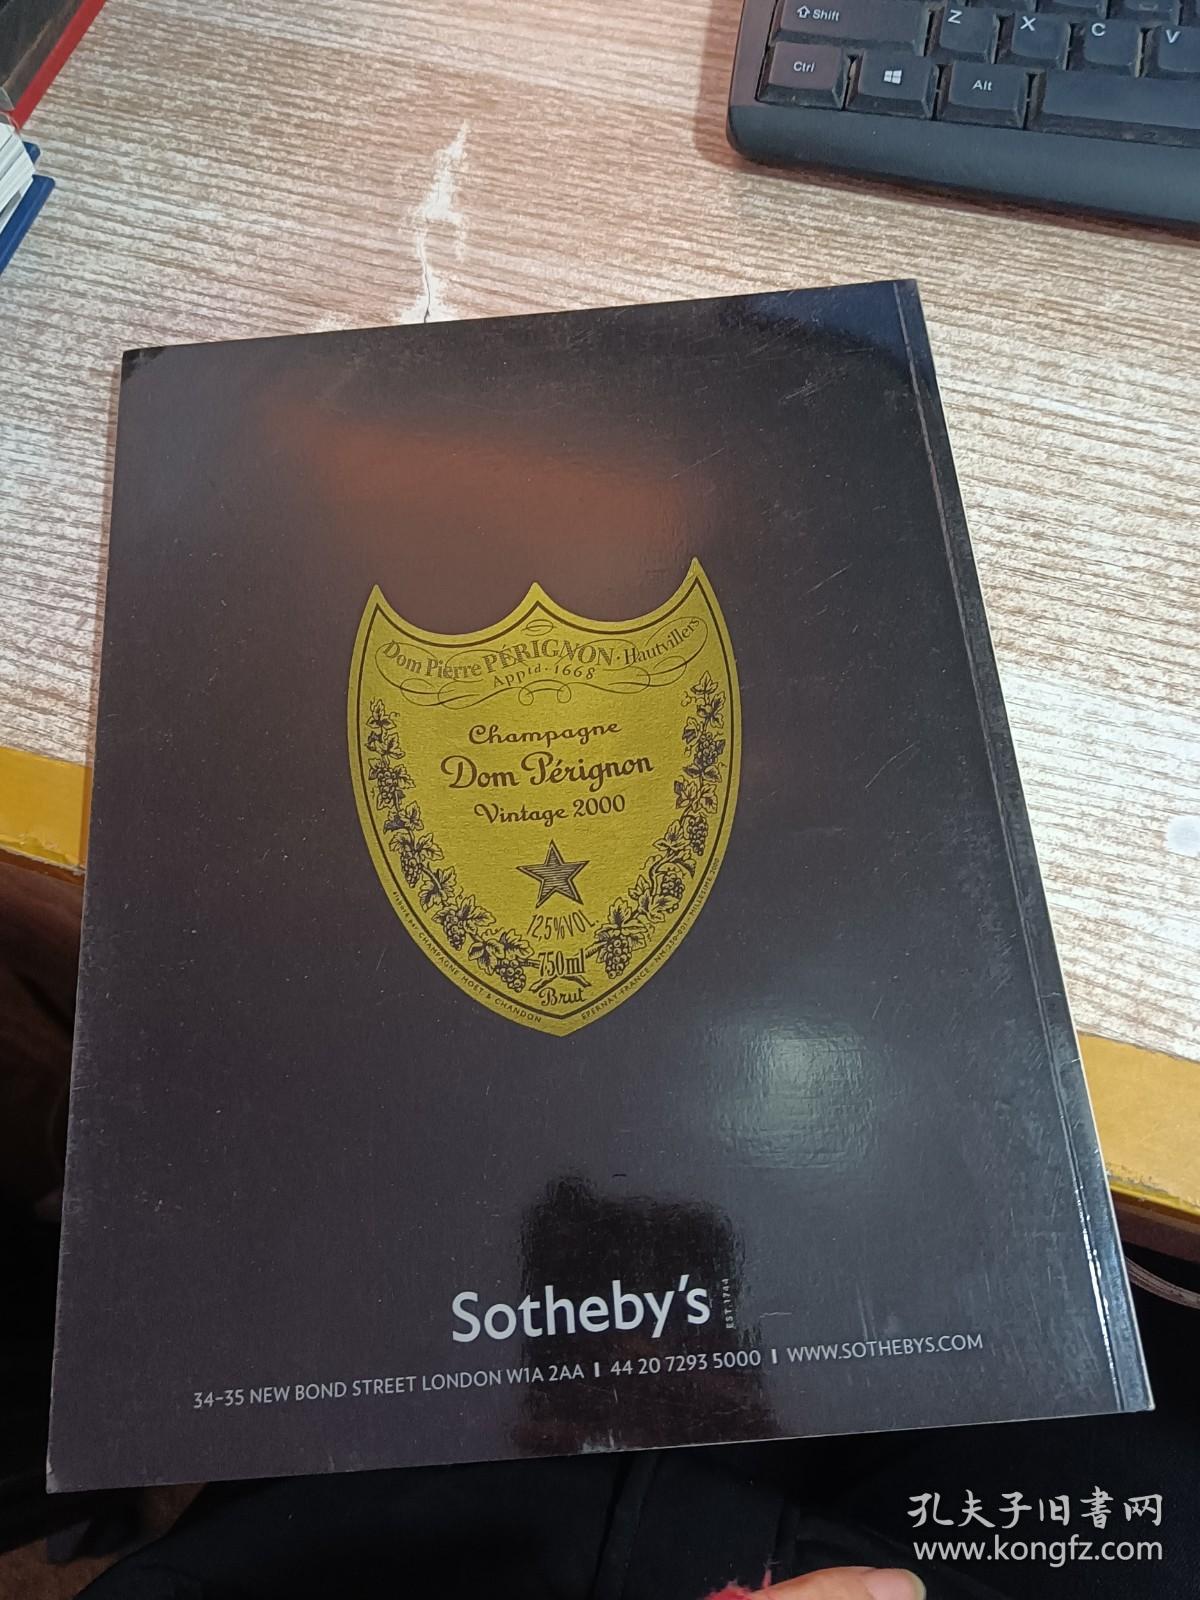 SOTHEBY'S FINEST AND RAREST WINES  JANUARY 2010  具体看图